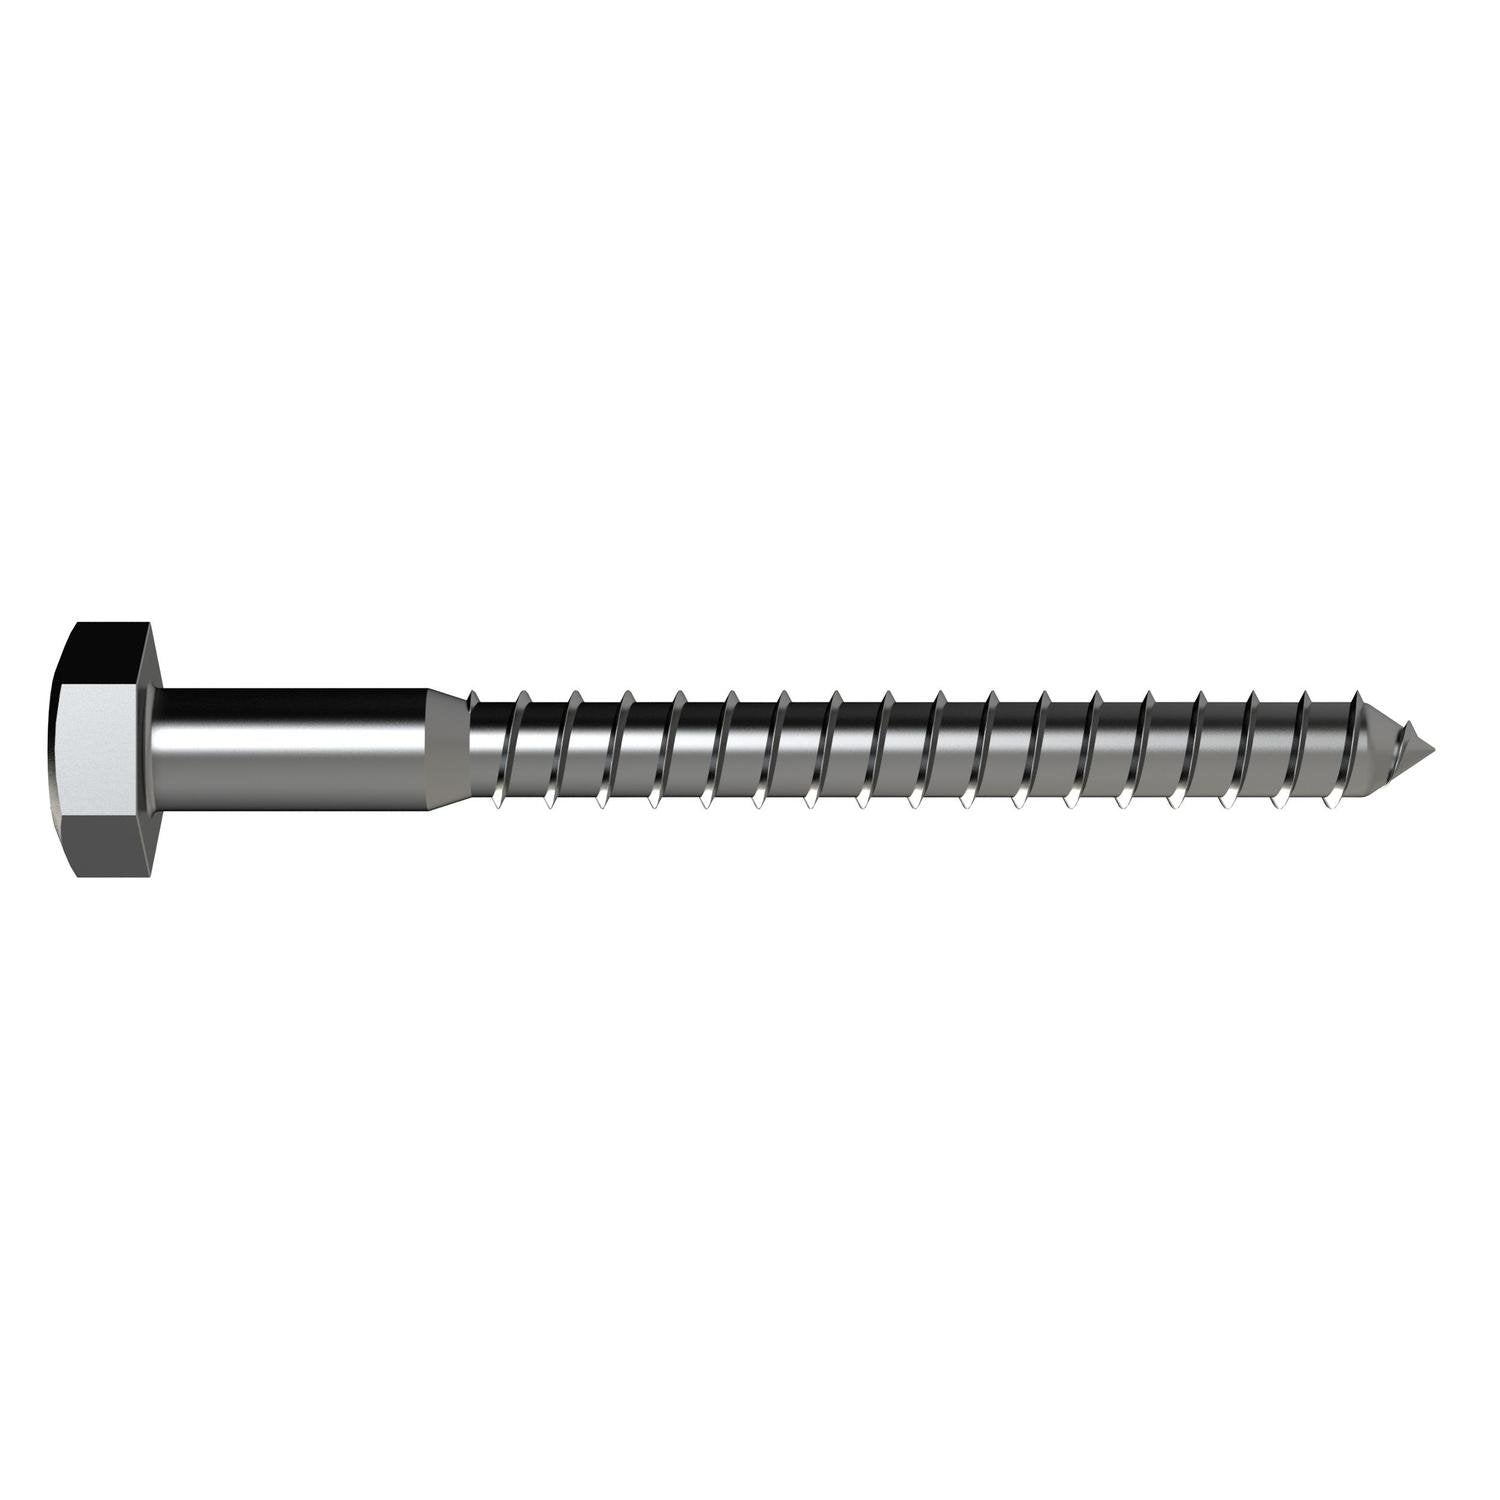 Bremick Coach Screws M12 X 180Mm Stainless Steel 316 (50 Pack)